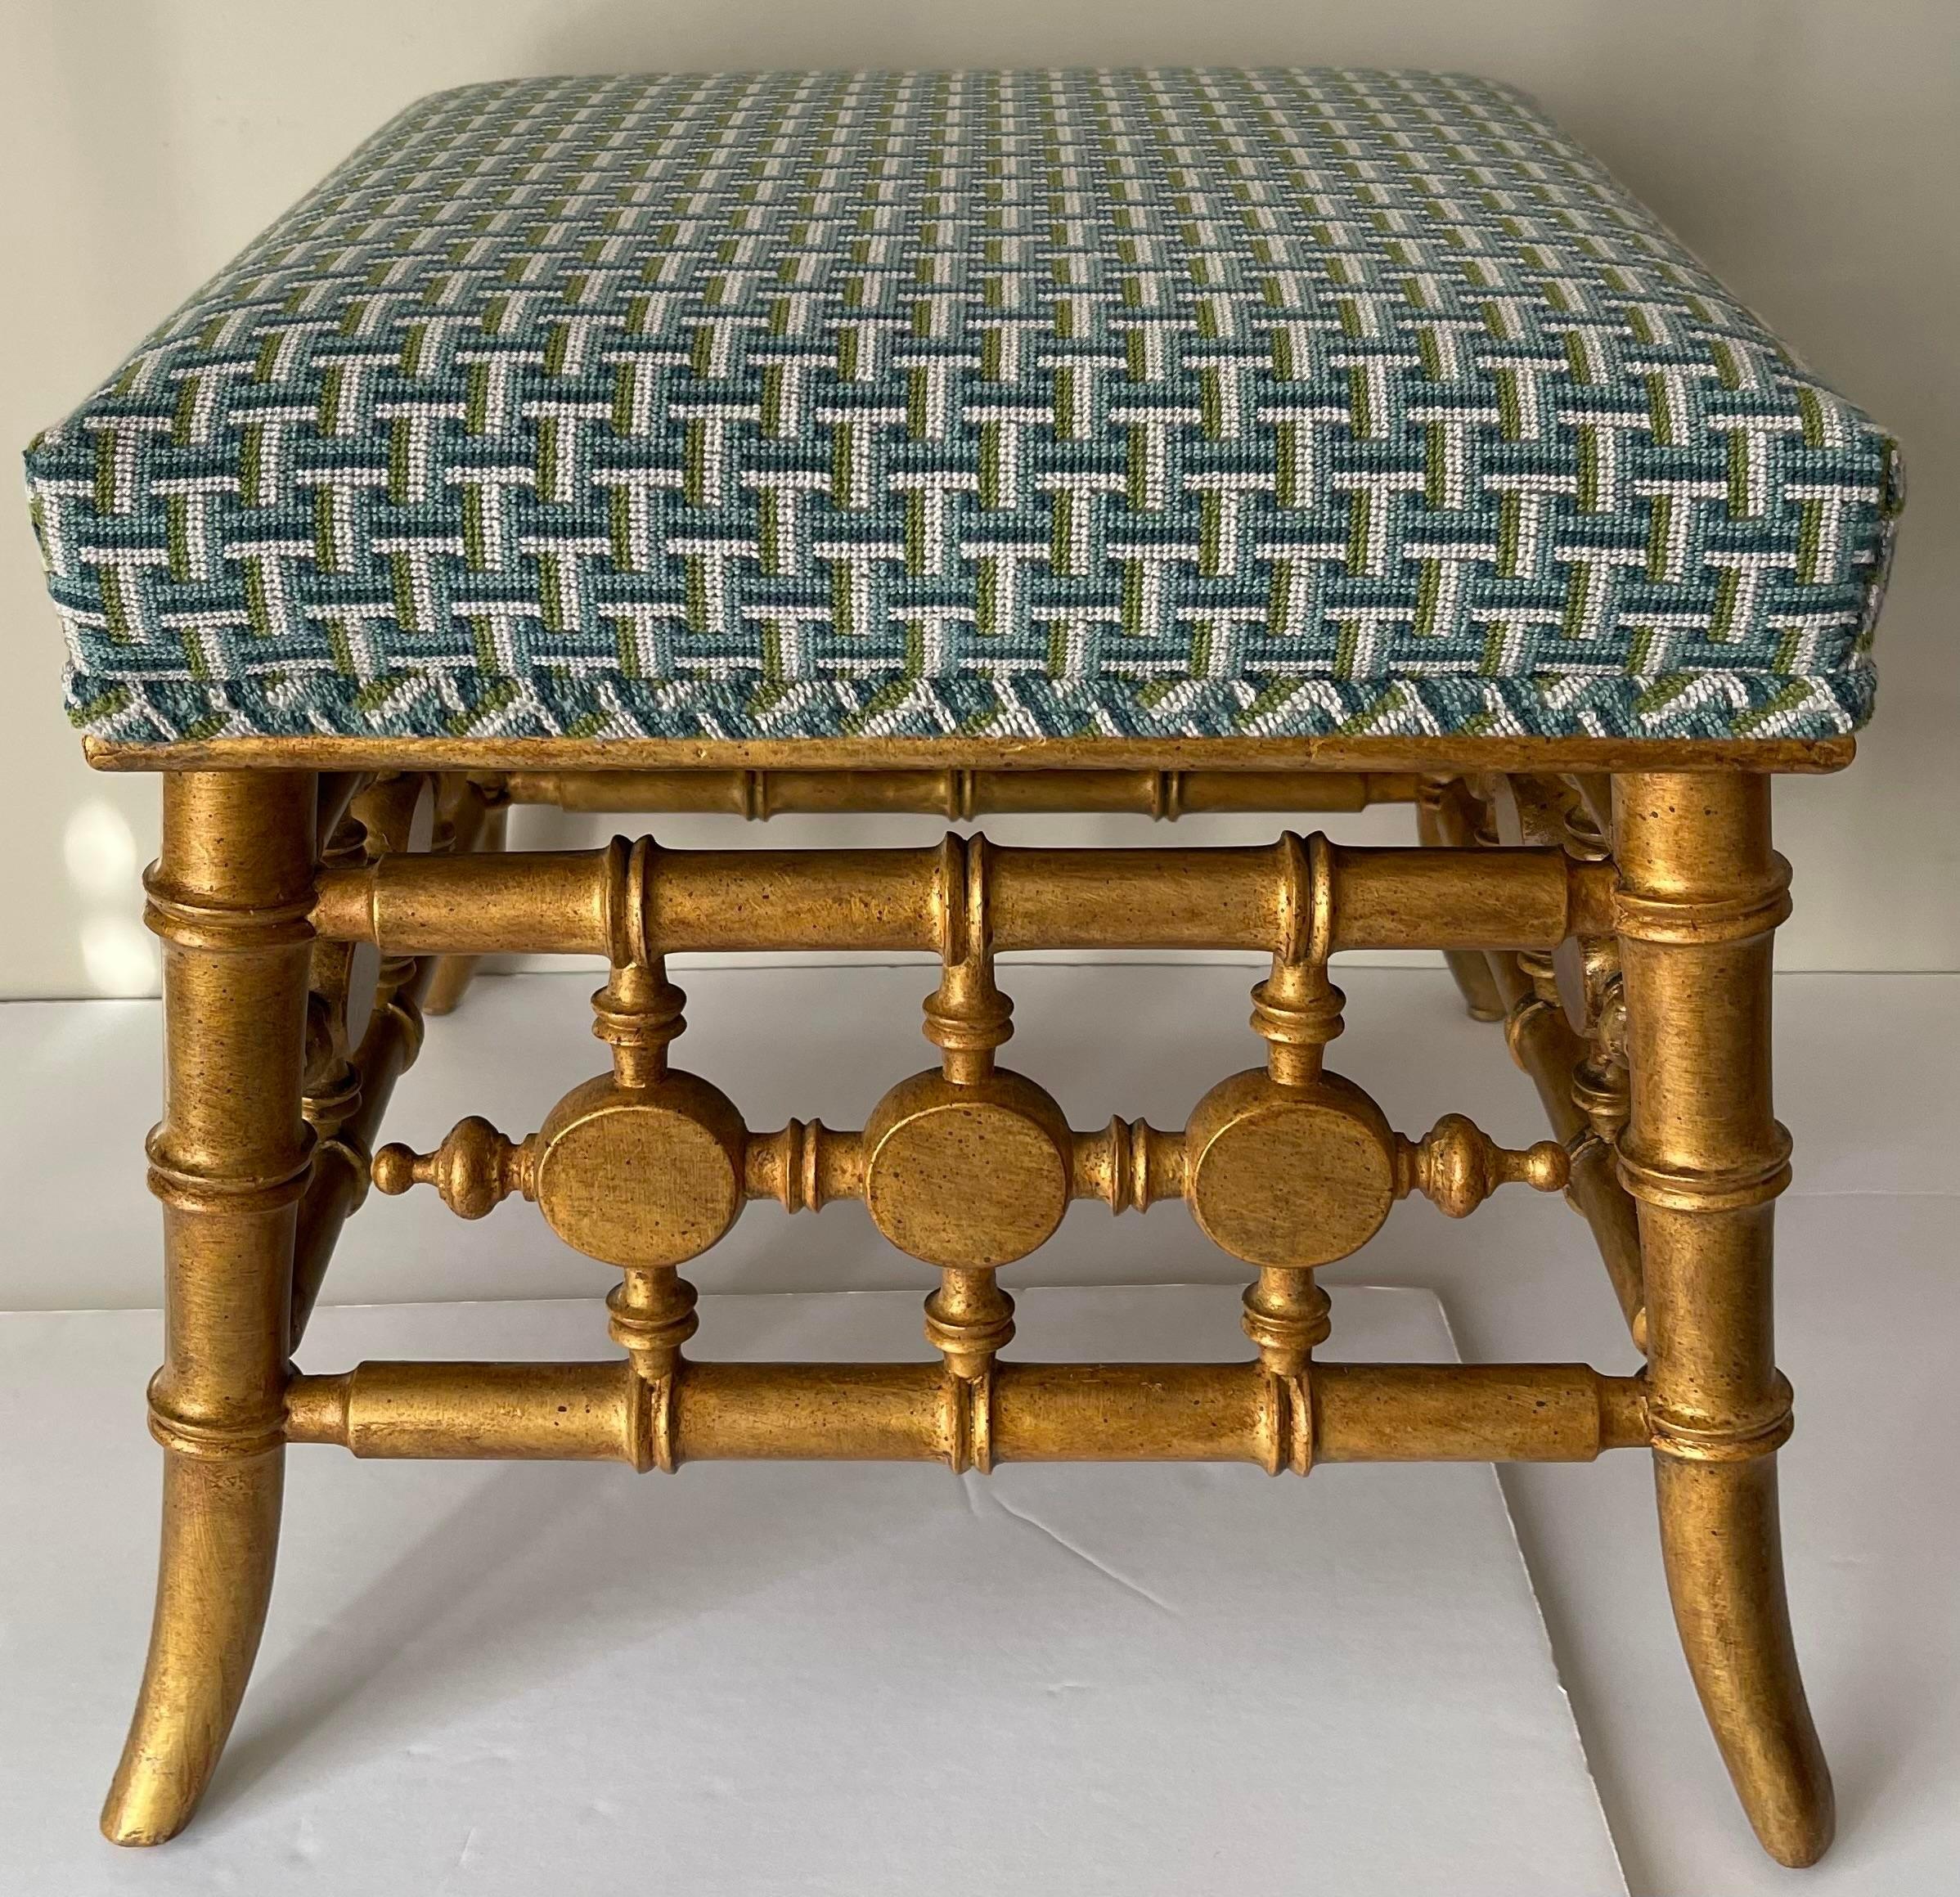 Antique giltwood faux bamboo stool. Newly painted in antique gold finish. Newly upholstered in Schumacher Saxon epingle fabric.